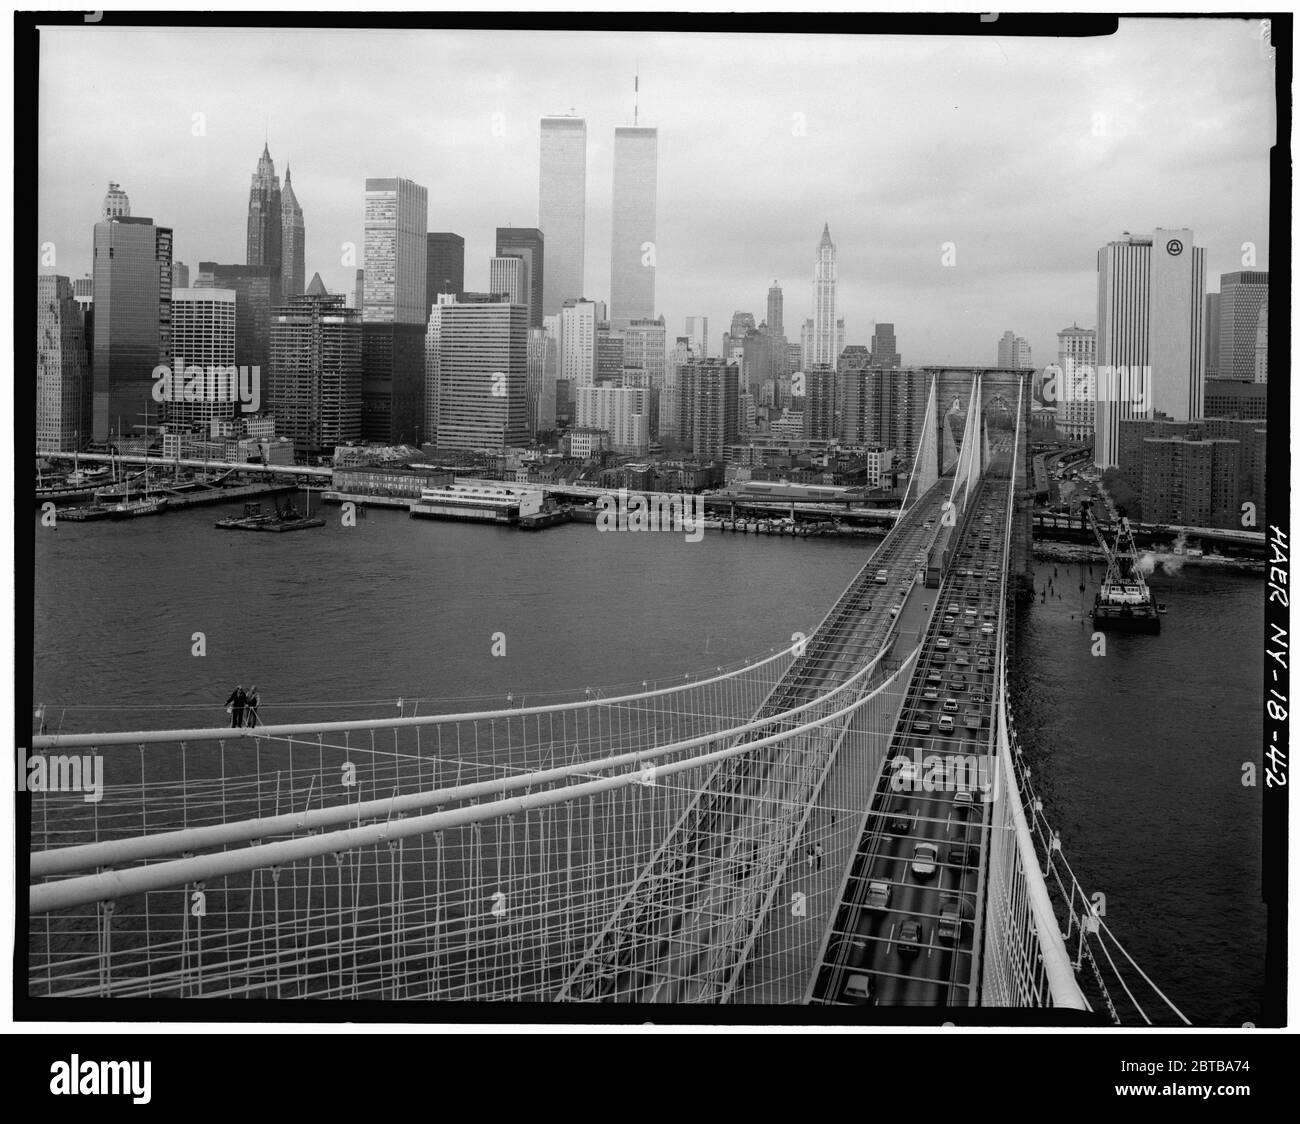 1982 , NEW YORK , USA :  View from top of Brooklyn Tower looking NW showing main cables and suspendors with lower Manhattan in the background. Brooklyn Bridge, Spanning East River between Park Row, Manhattan and Sands Street, Brooklyn, New York, New York County, NY The great East River suspension bridge, opened the day 24 may 1883 . Connecting the cities of New York and Brooklyn  . Photo by Jet Lowe ( images made by the U.S. Government ) - BROOKLYN BRIDGE - PONTE DI BROOKLYN - FOTO STORICHE - HISTORY - GEOGRAFIA - GEOGRAPHY  - landscape - paesaggio - veduta - panorama - fiume Hudson river  - l Stock Photo